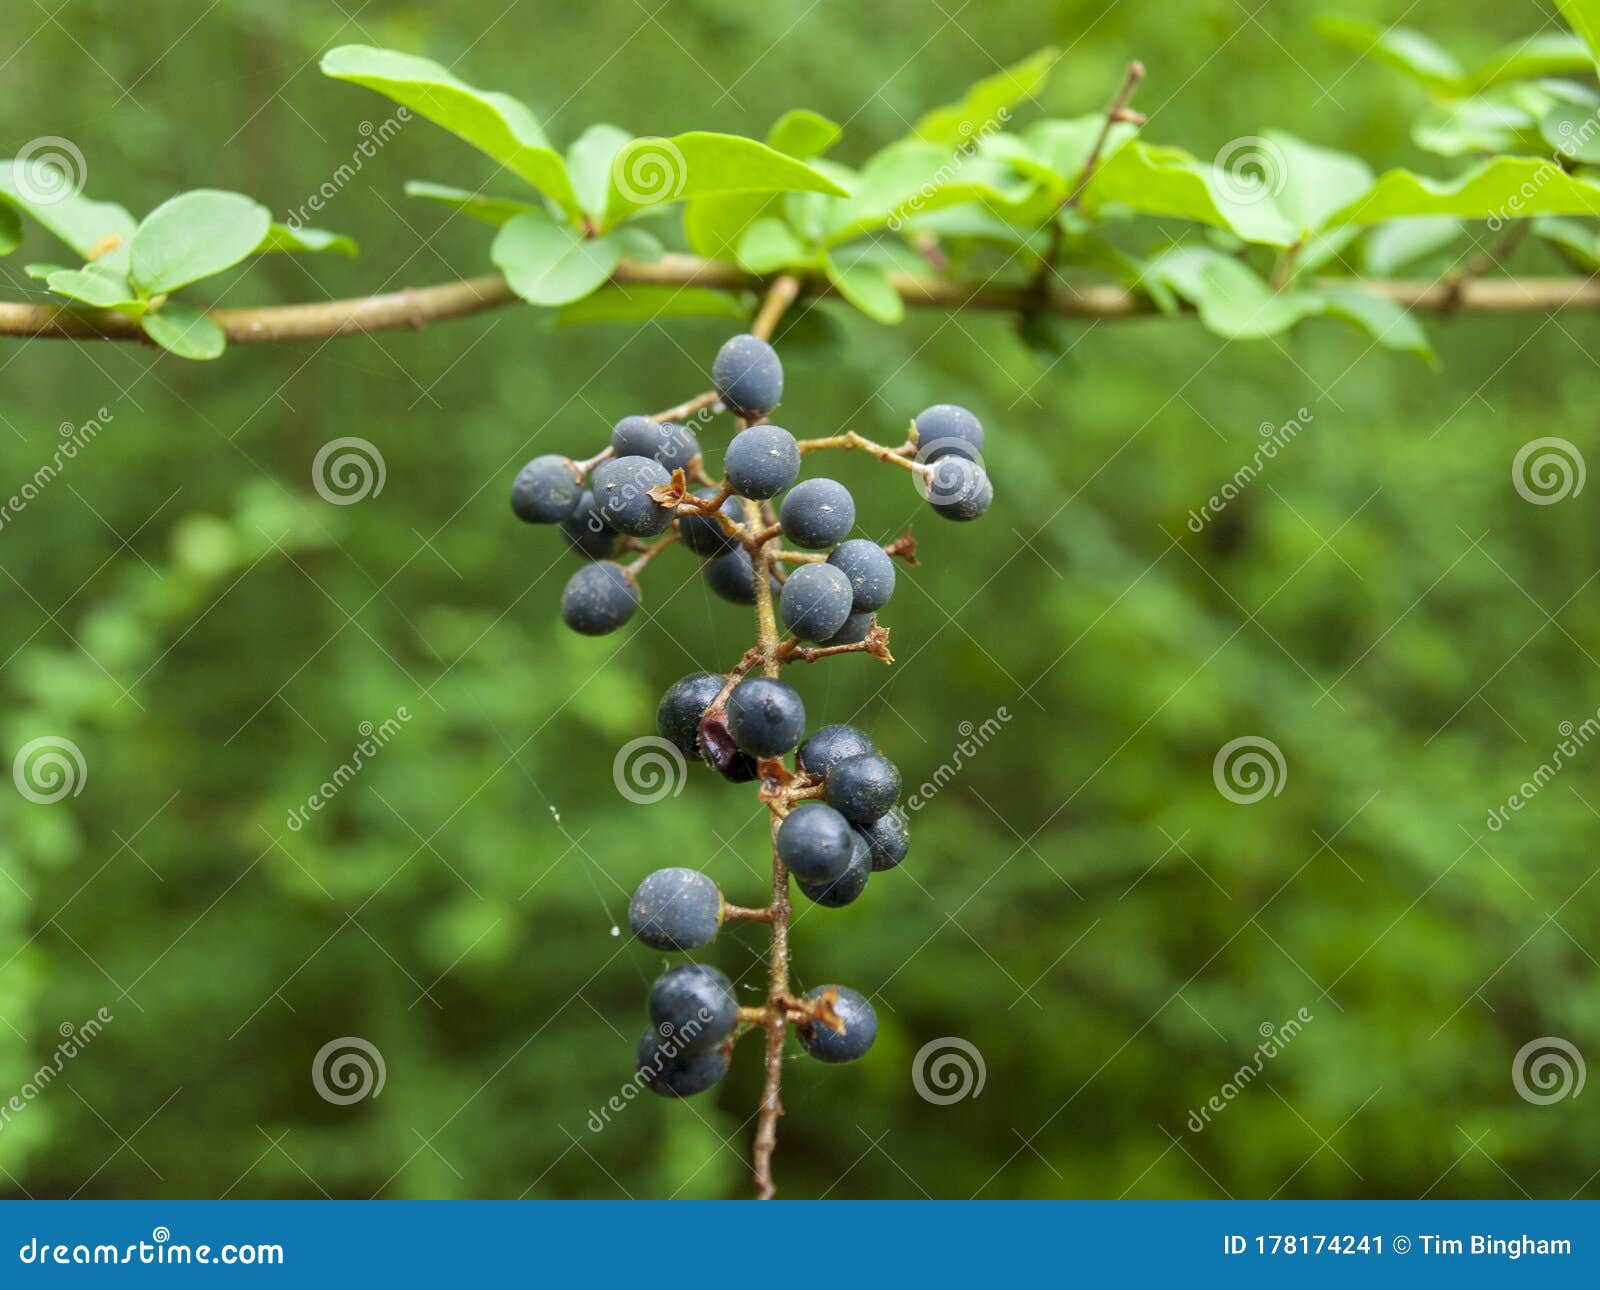 Solskoldning artilleri Stolt Wild Blue Colored Berries Growing on Tree Stock Image - Image of forest,  tree: 178174241